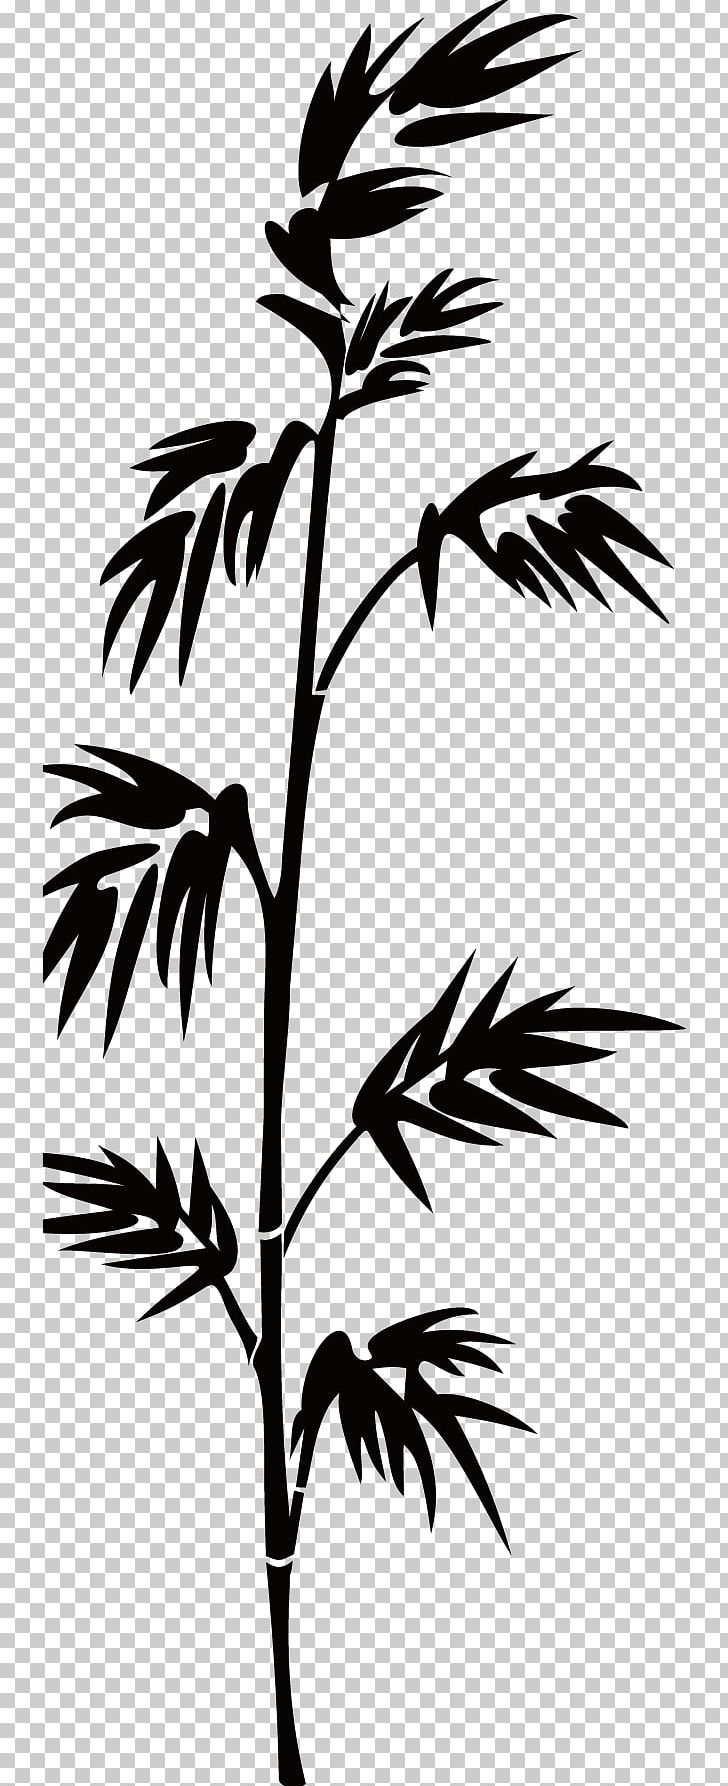 Bamboo Silhouette Bamboe PNG, Clipart, Black, Black Hair, Branch, Chinese Style, Encapsulated Postscript Free PNG Download